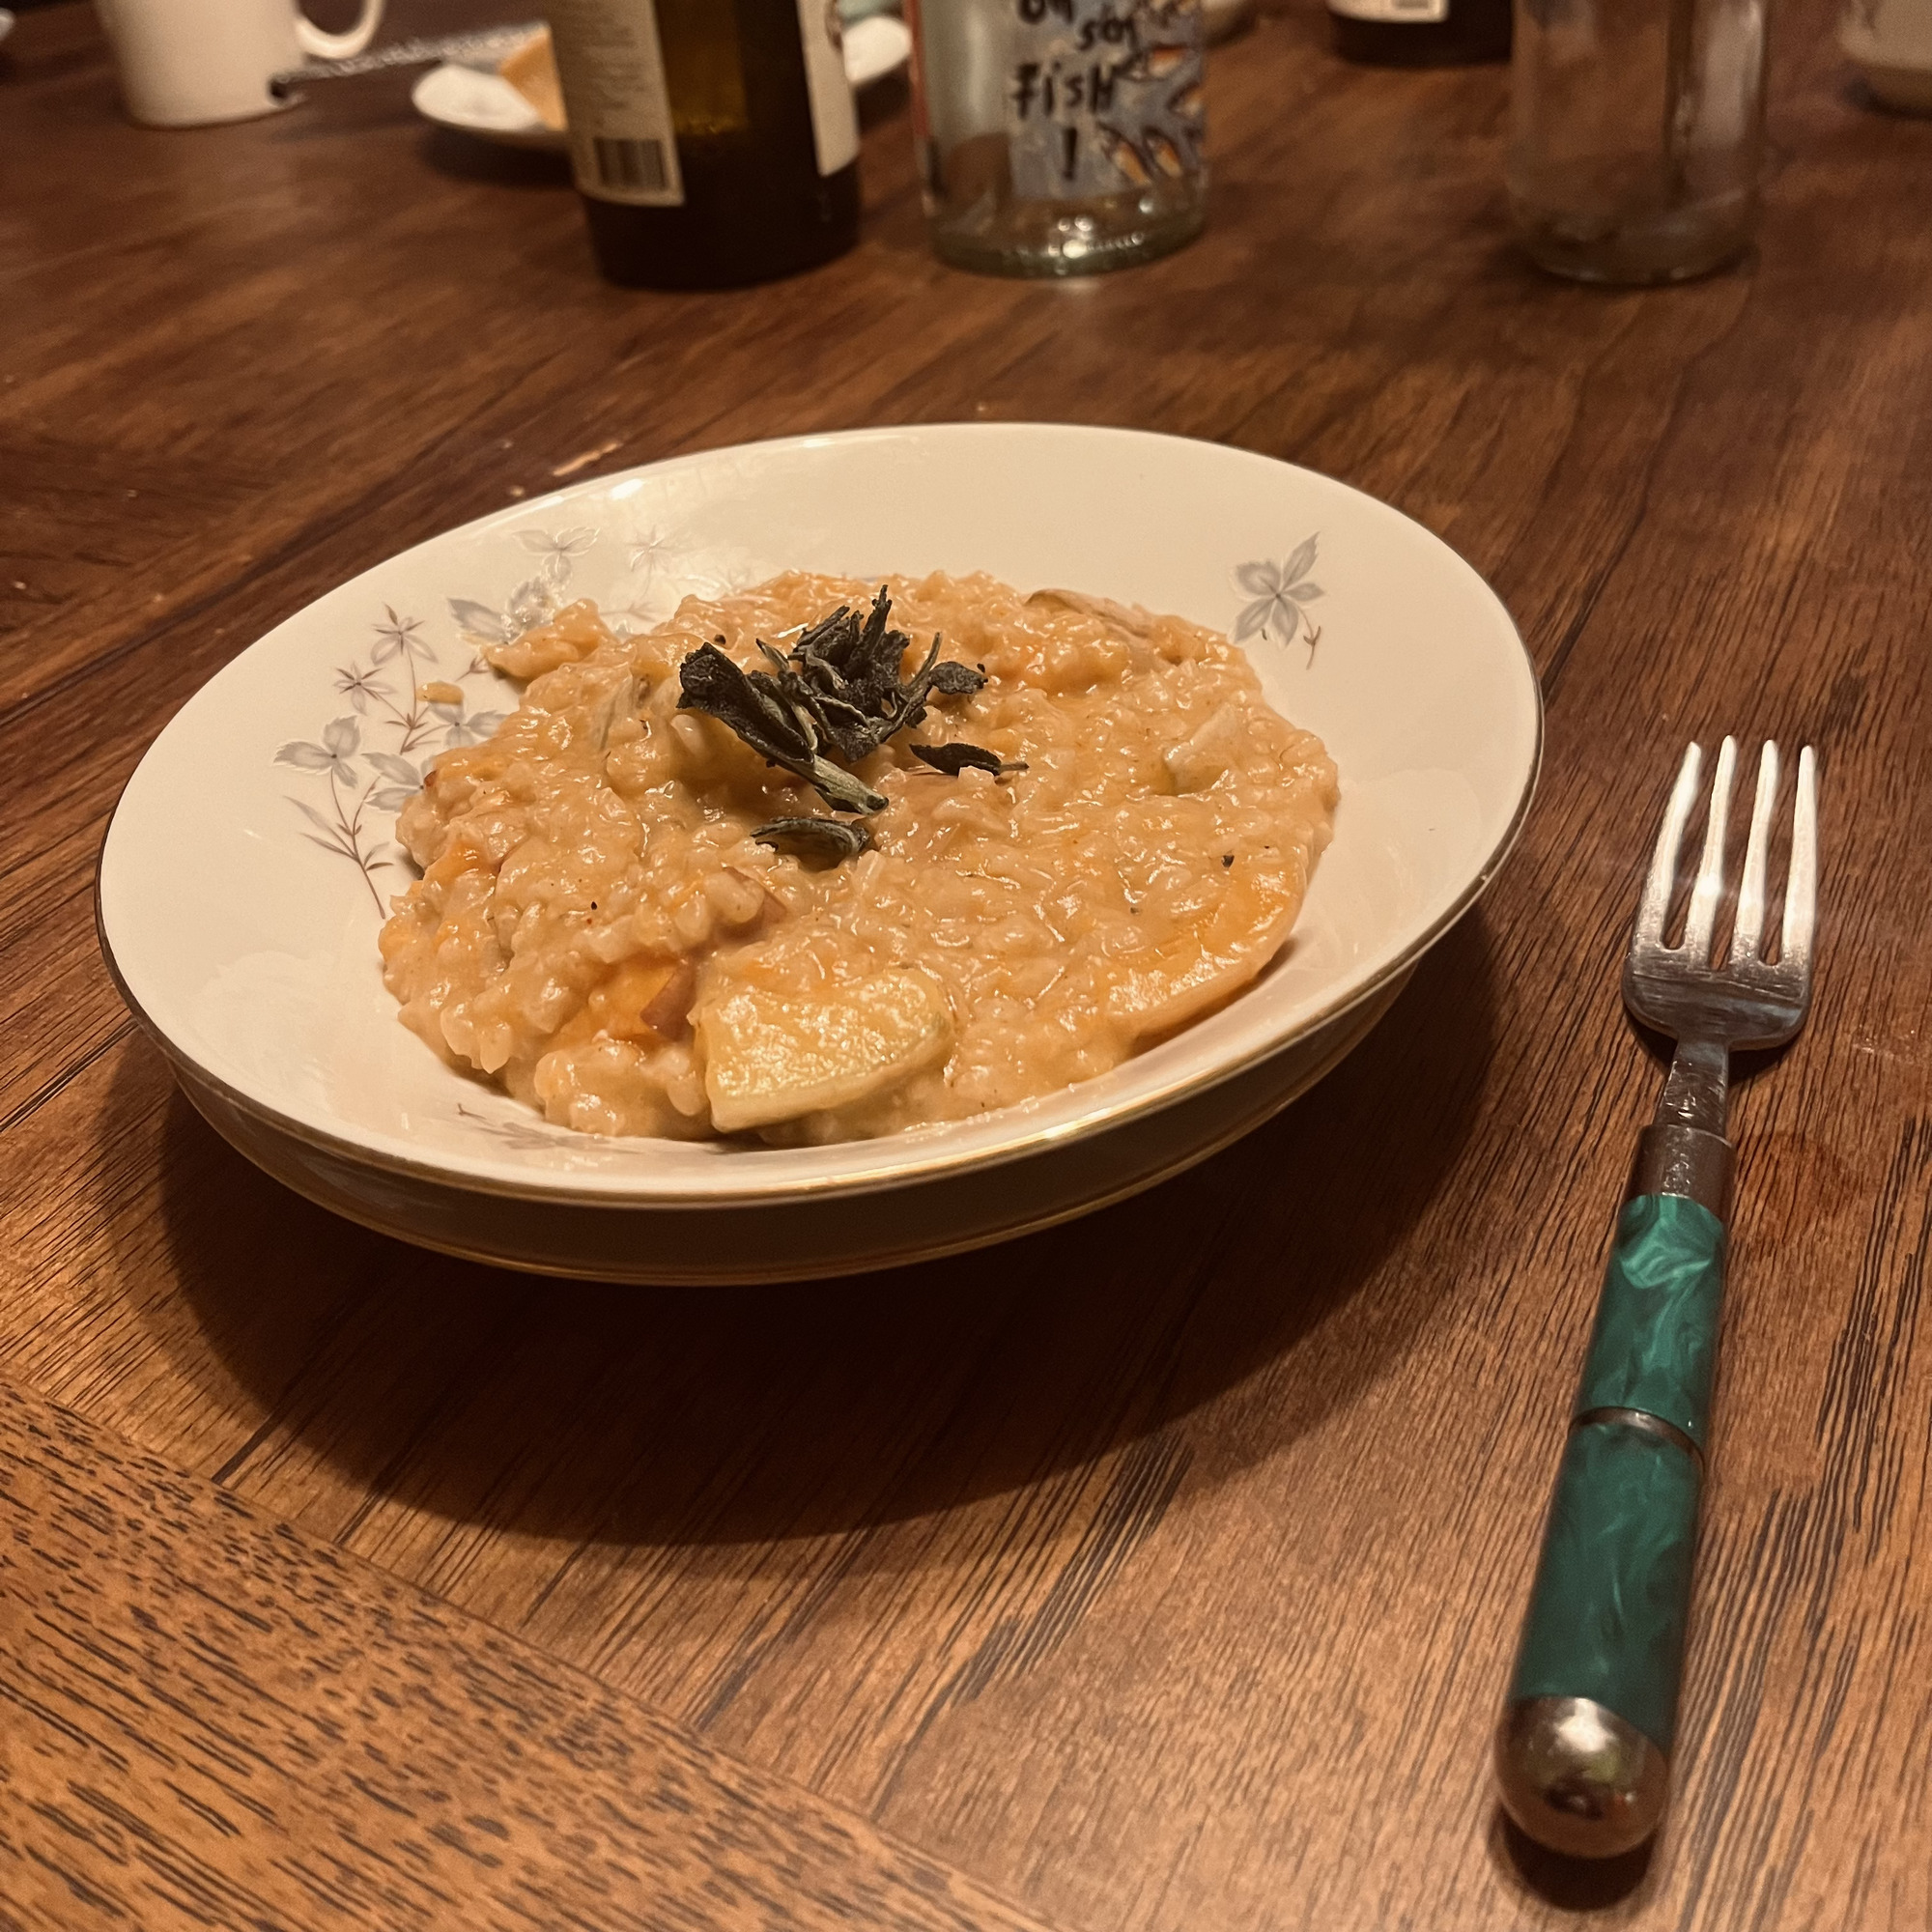 Aris picture of the risotto in question. With an Instagram filter on it…